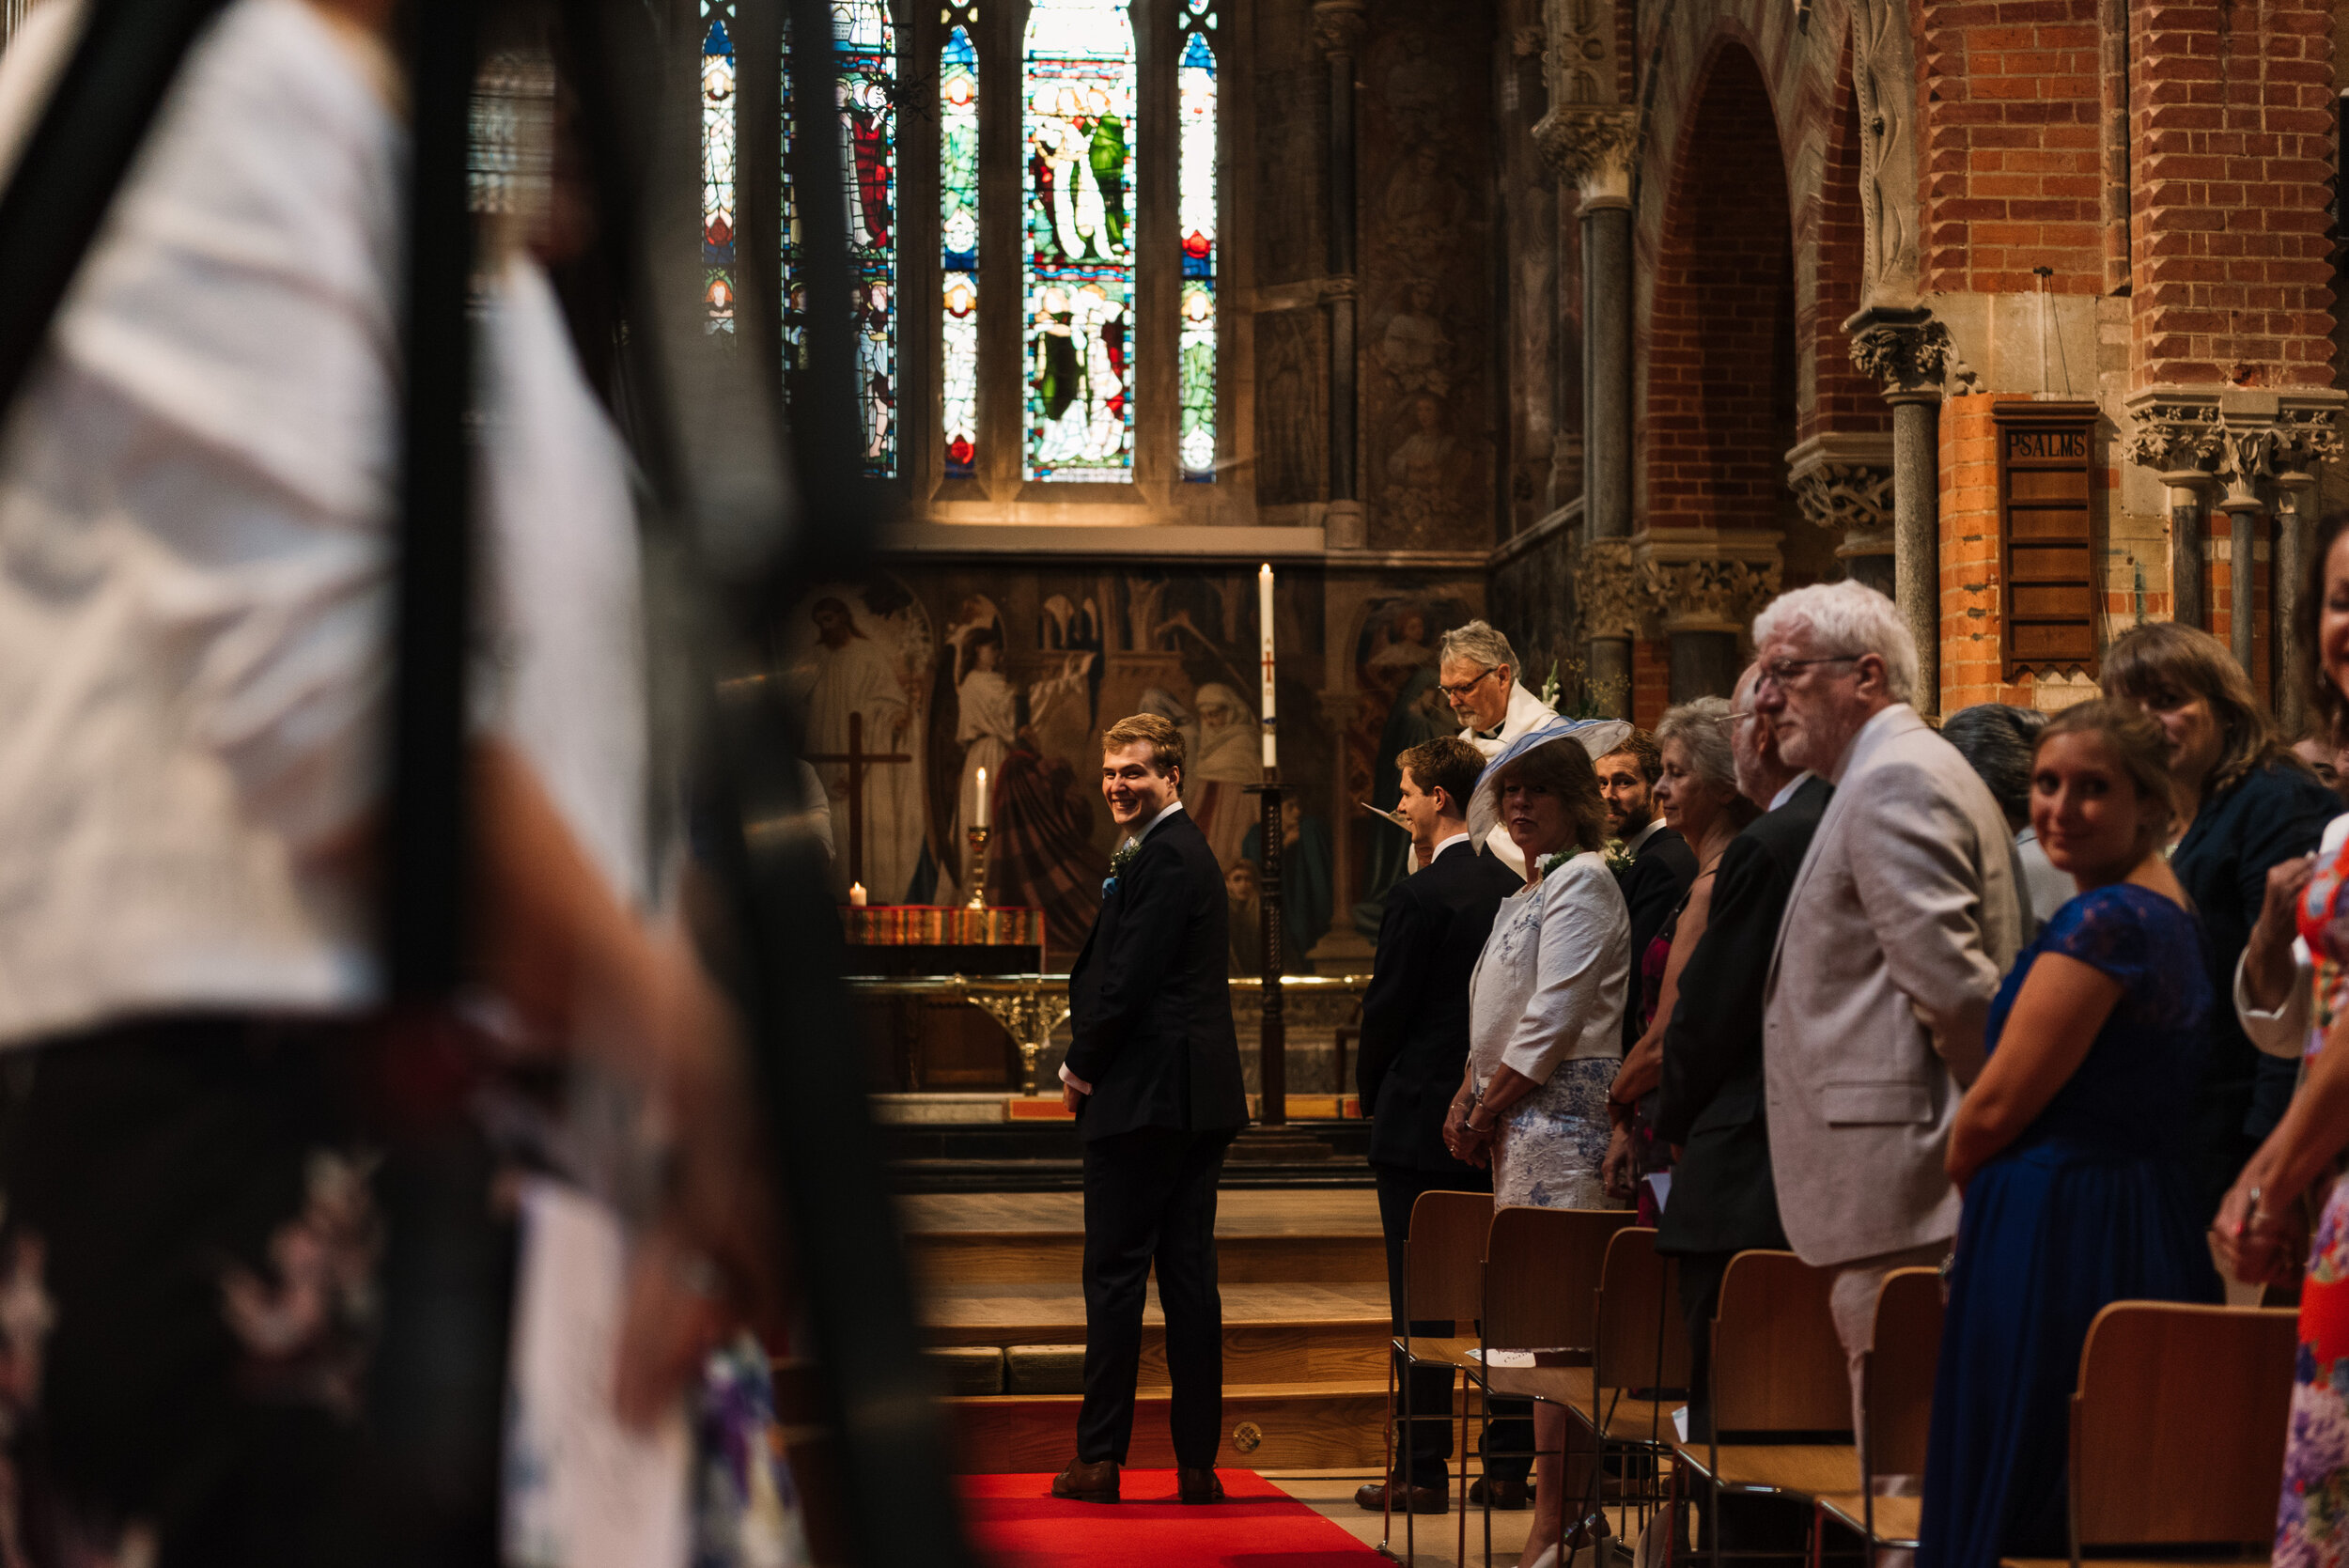 Groom turning around to look down aisle at bride